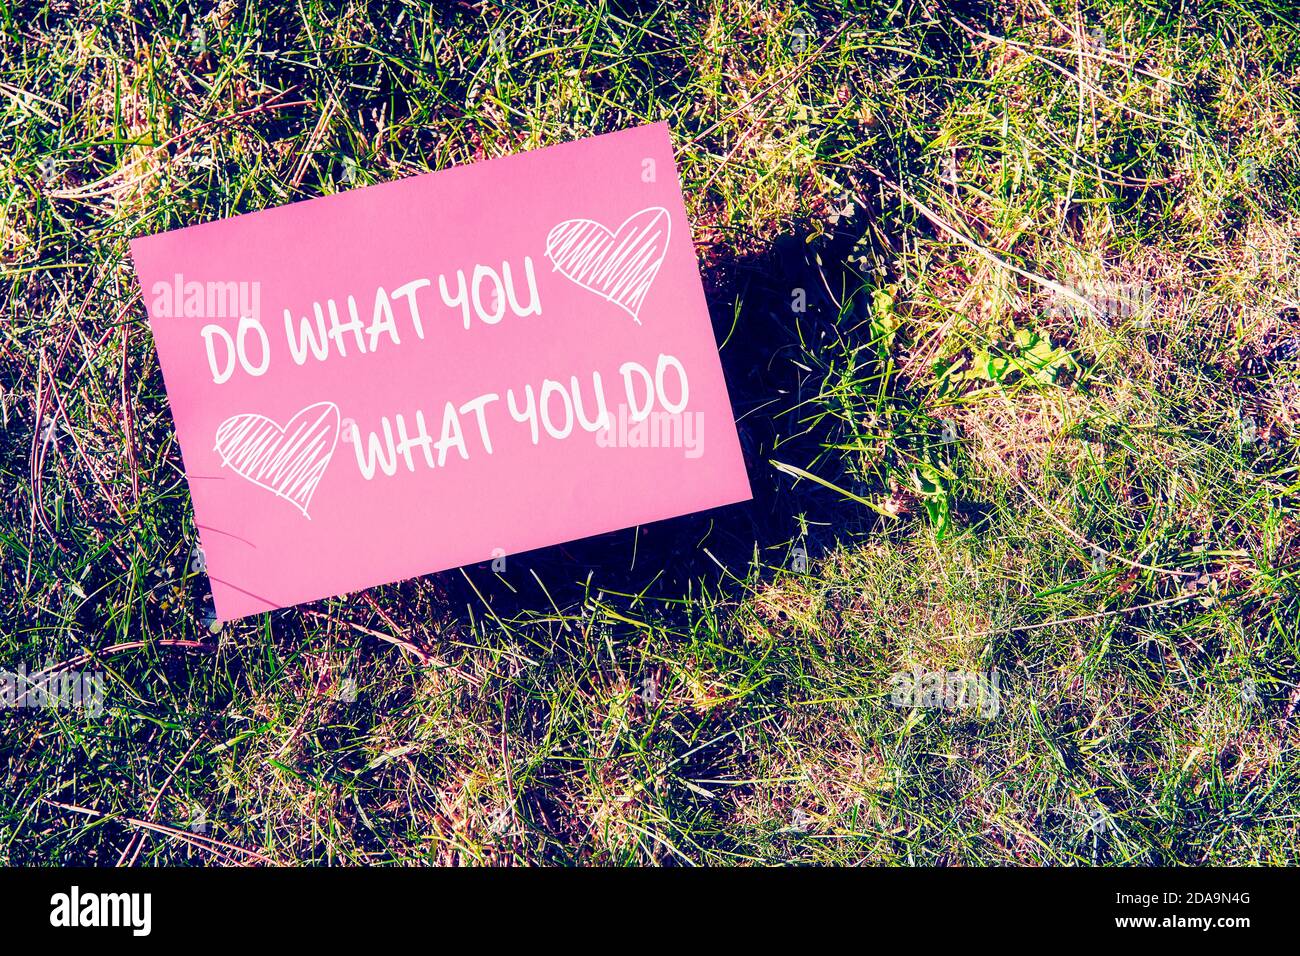 Do what you love concept written on paper on green grass background. Inspirational quote for motivation, happiness or success in business or life. Stock Photo